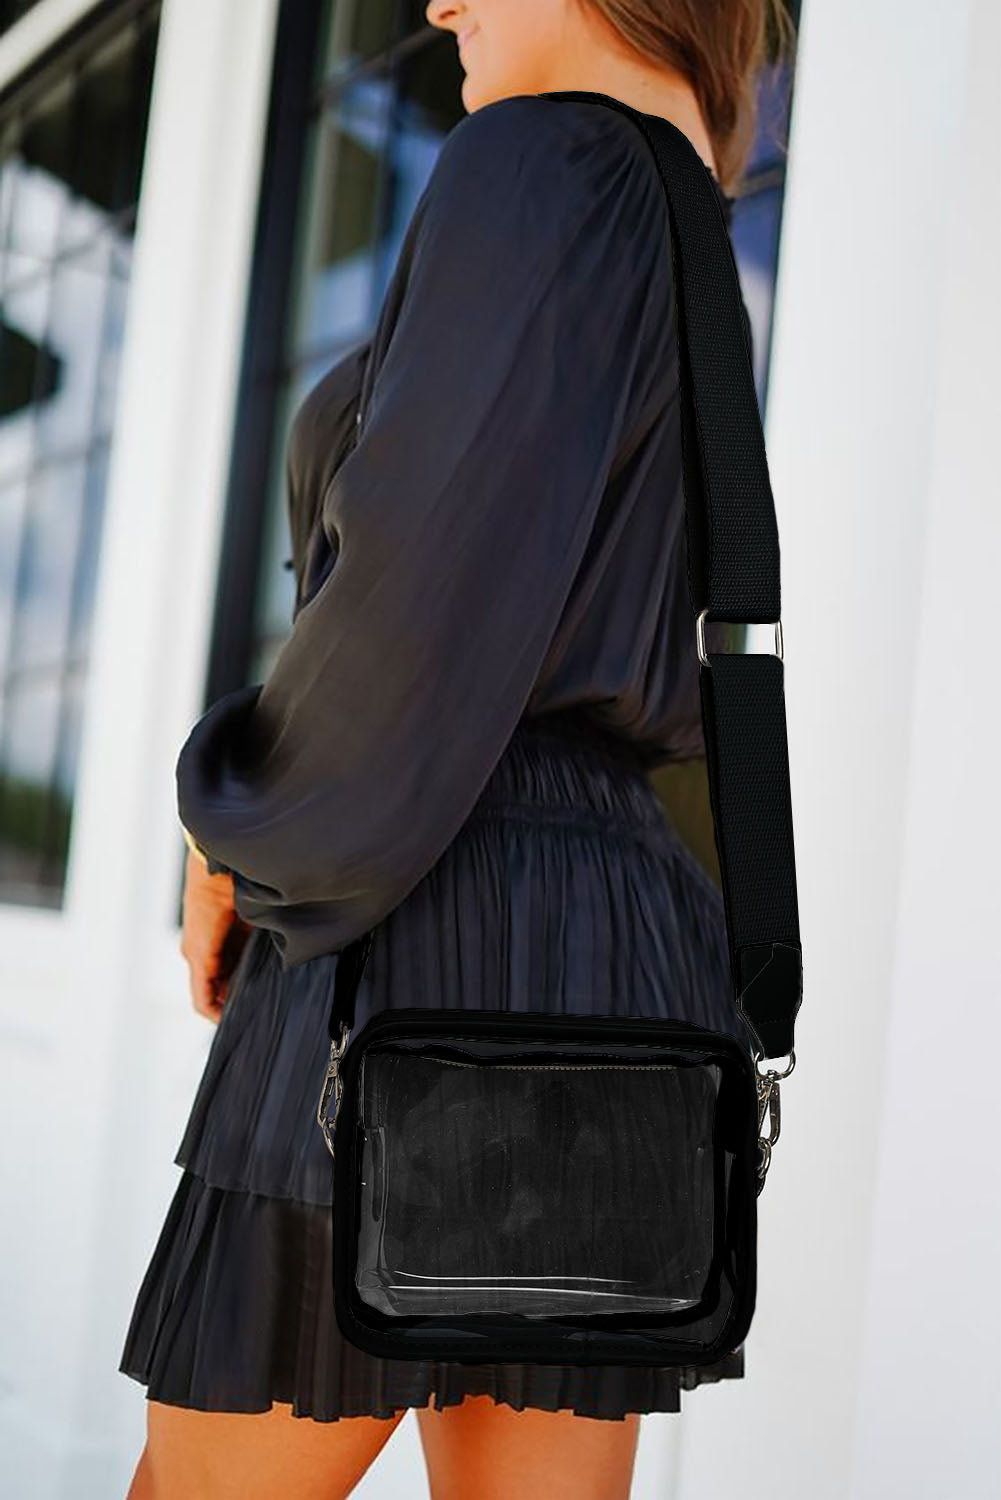 Transparent Chic: Black Clear PVC Crossbody Bag with Leather Strap